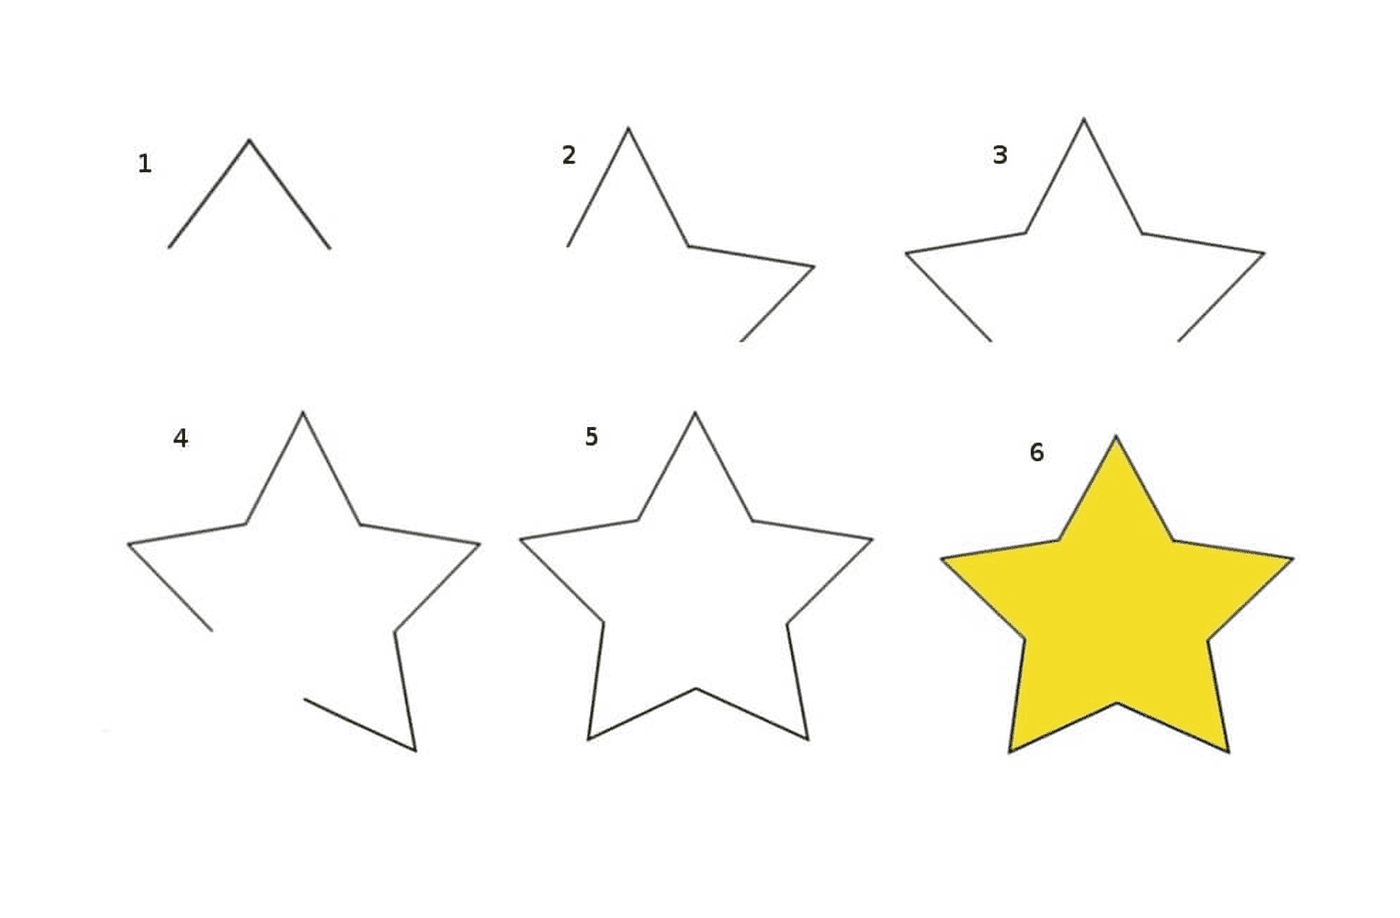  Five different forms of yellow stars 